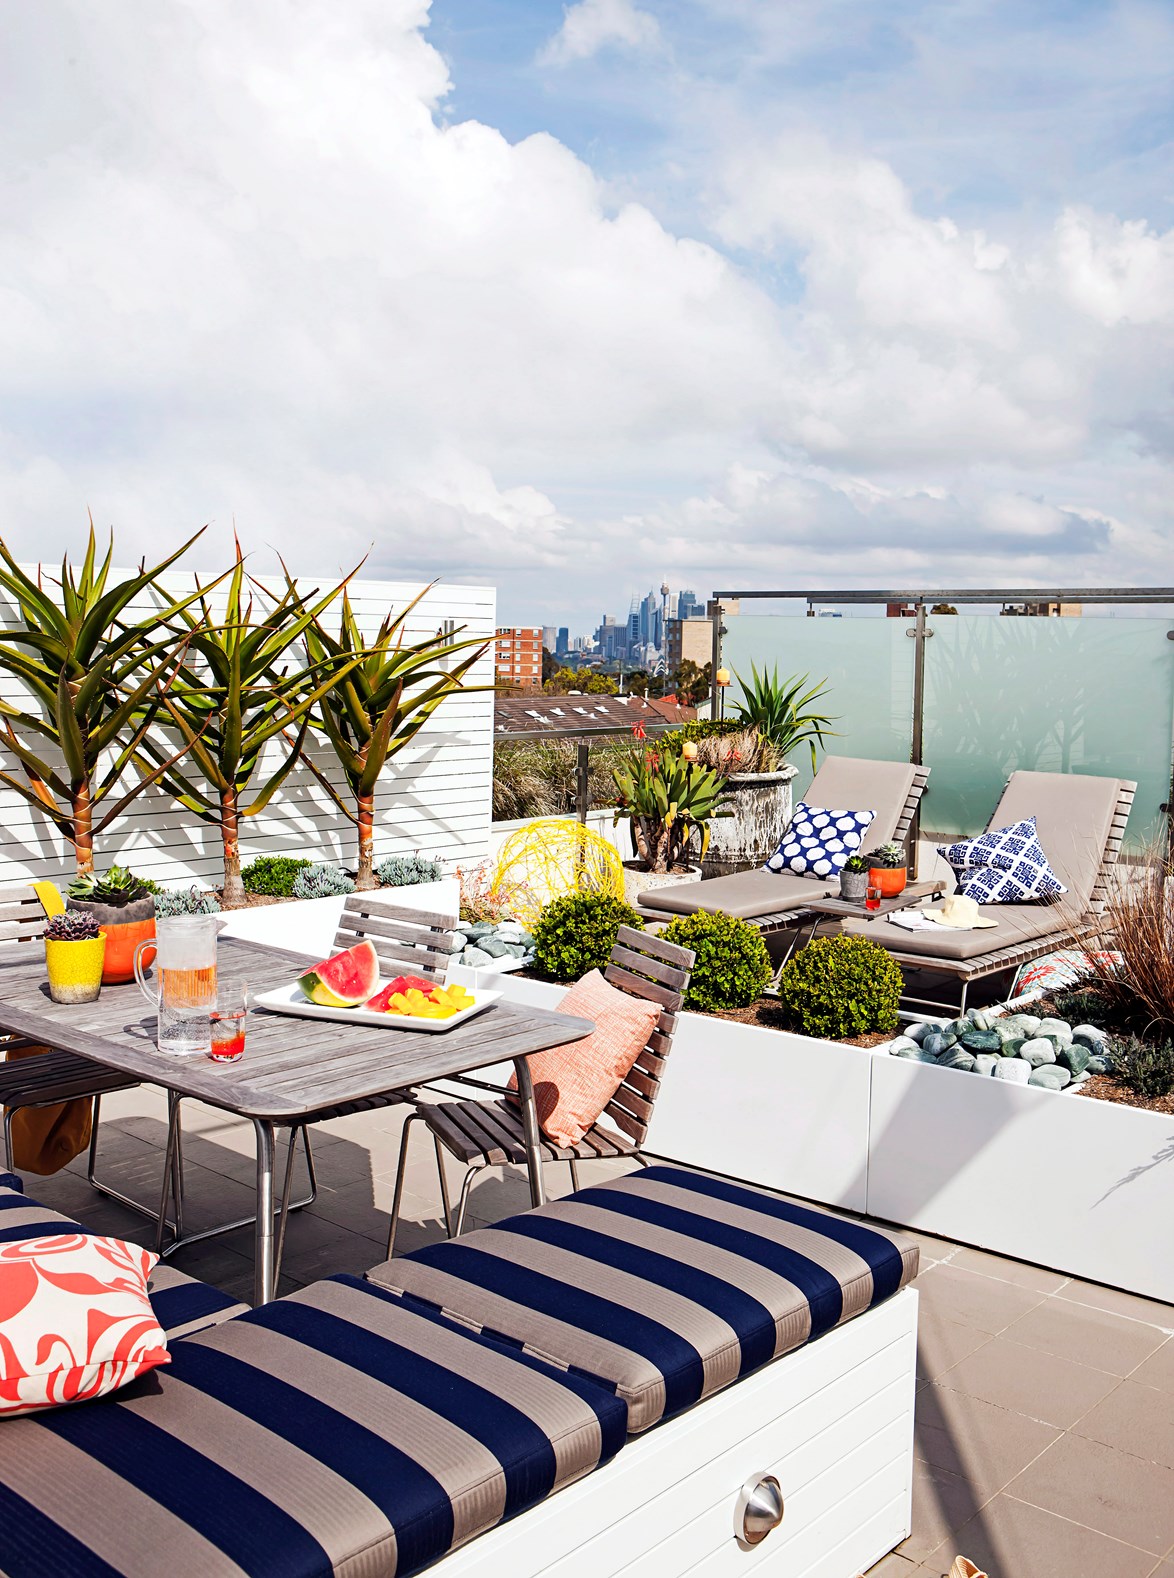 The fully-decked-out rooftop balcony with views of the Sydney skyline is what inner-city dreams are made of.